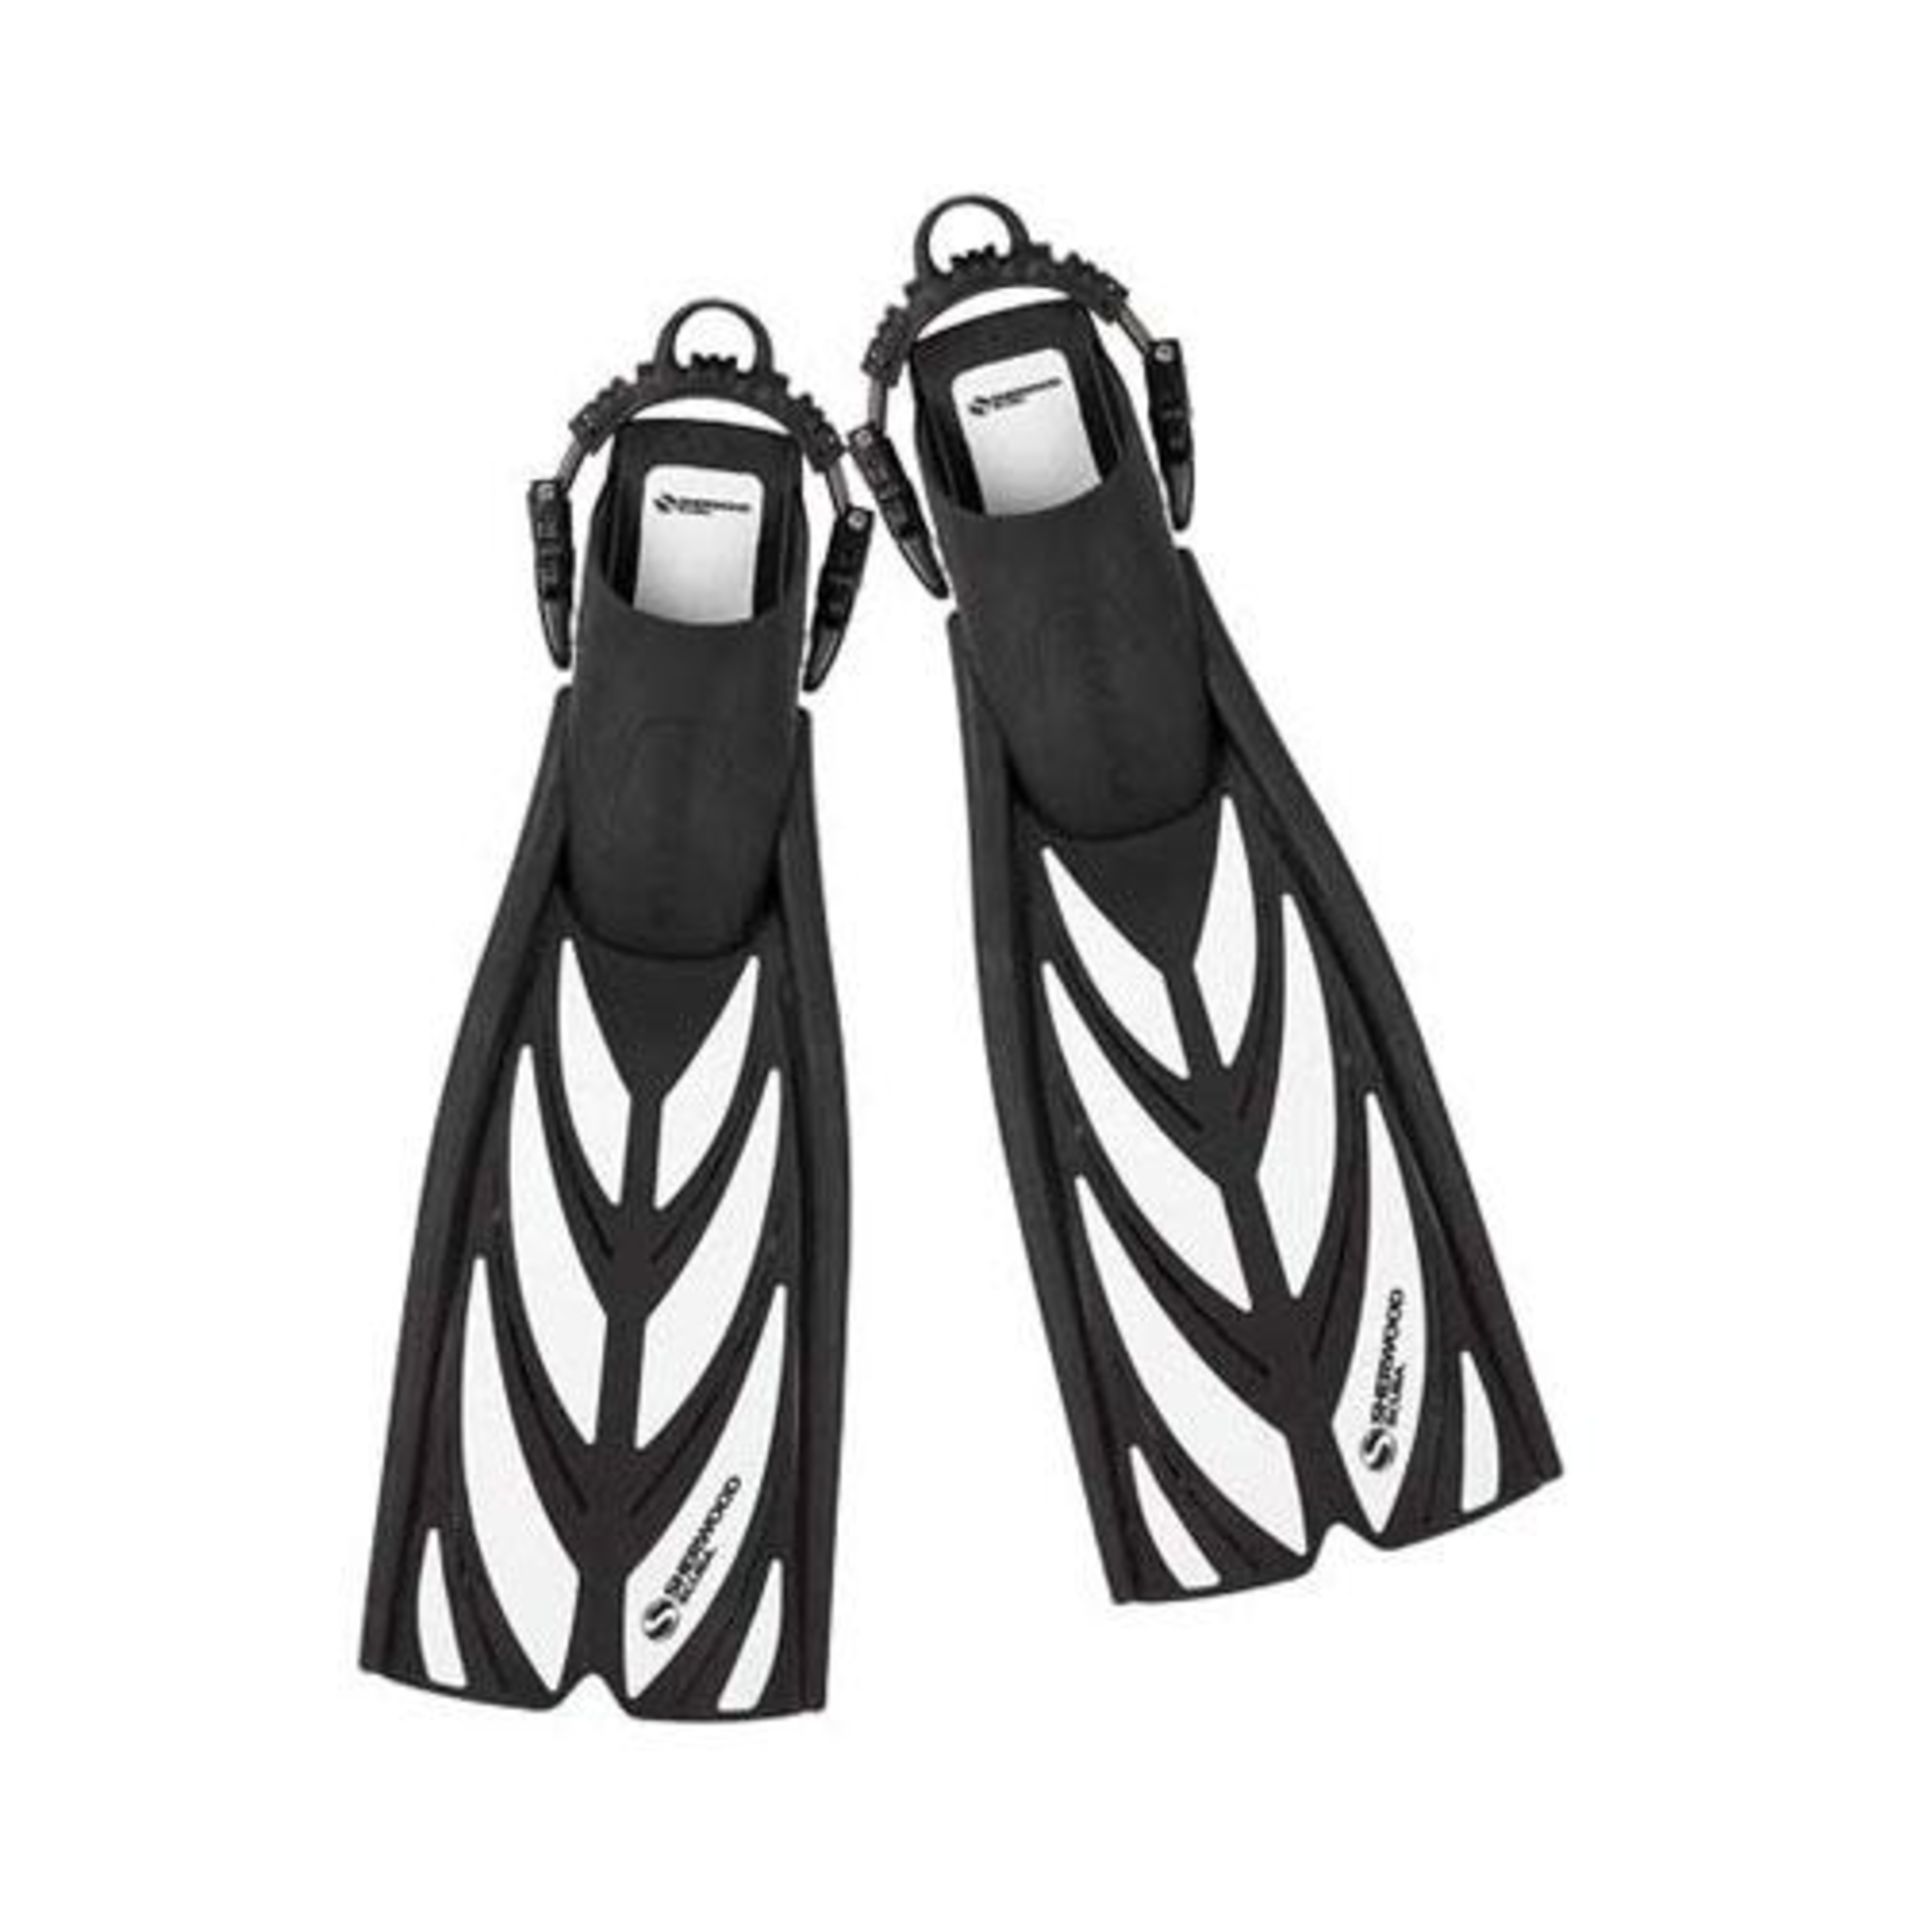 A Pair Of New Sherwood Scuba Fusion Diving Fins - Ref: RB189, RB190 - CL349 - Altrincham WA14